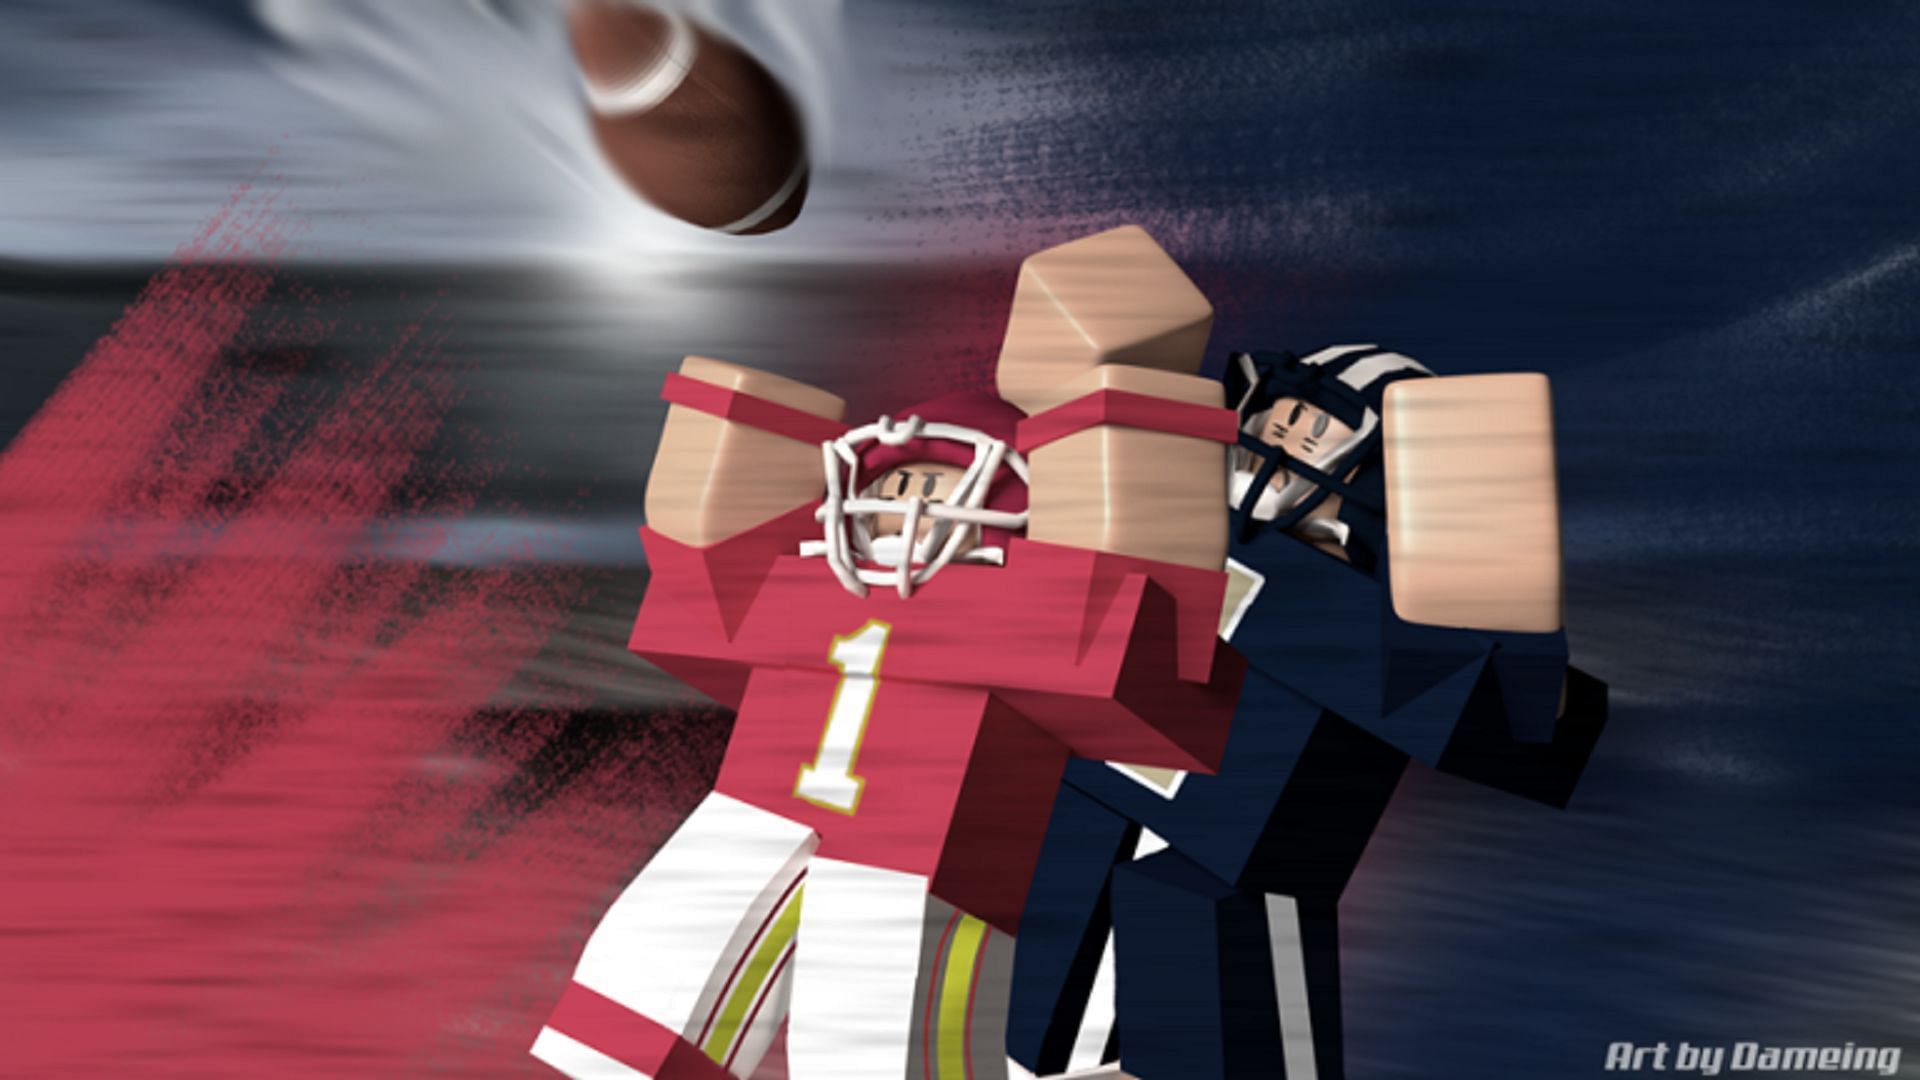 Players can still play Football Fusion in 2021 (Image via Roblox)